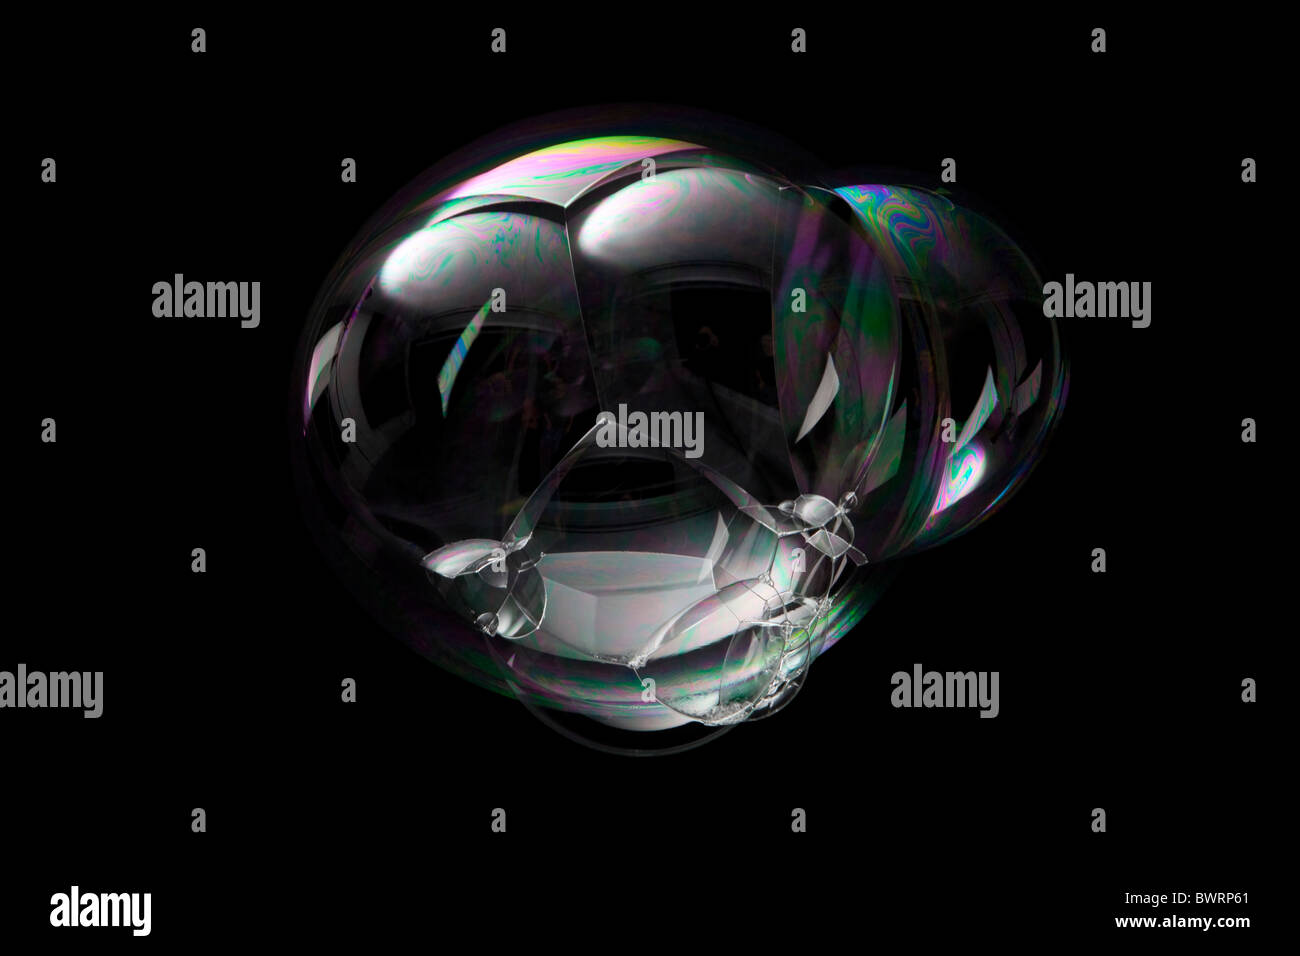 Soap bubble in front of black Stock Photo